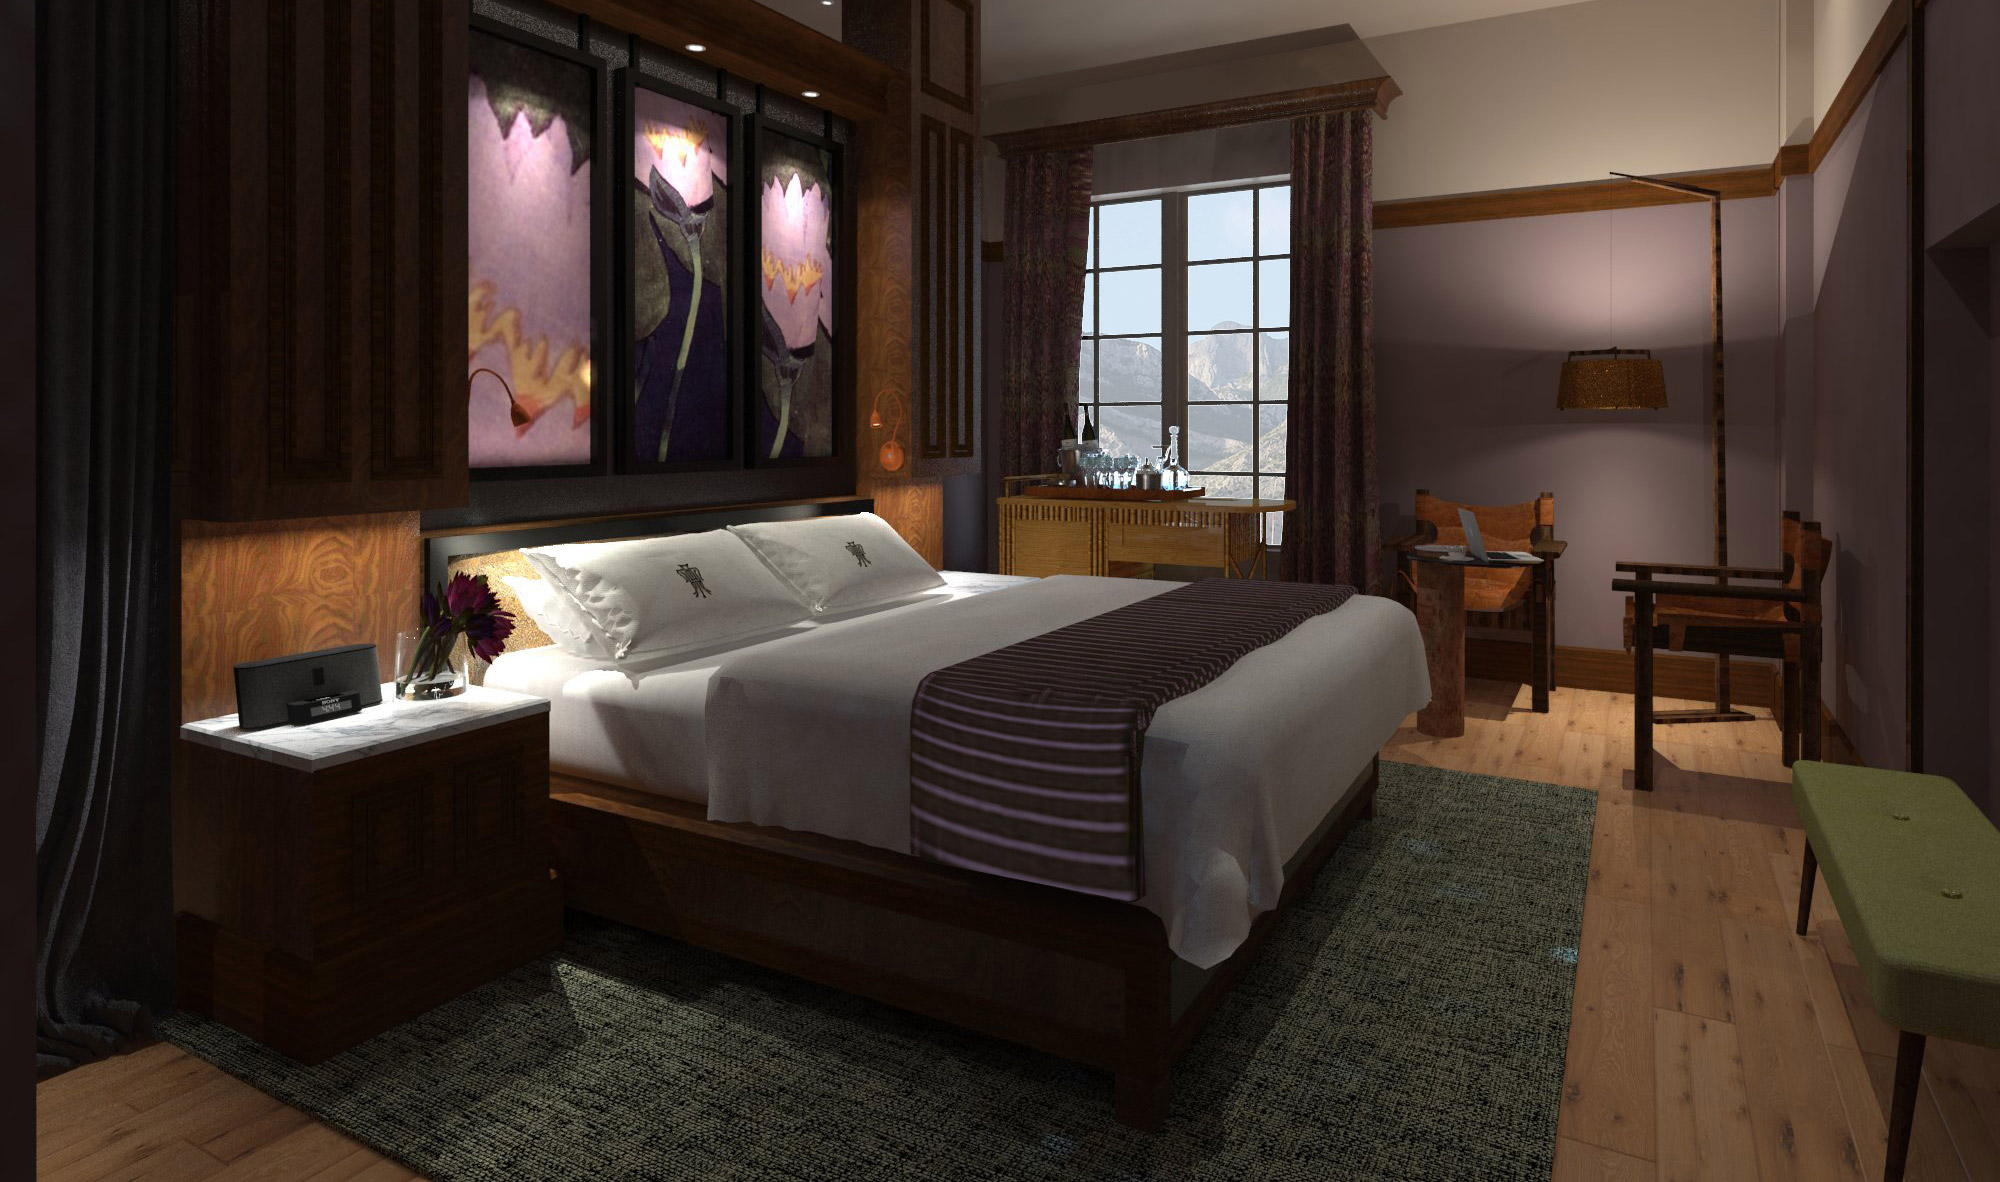 Rendering of a typical guest room with purple hues and mood lighting. 